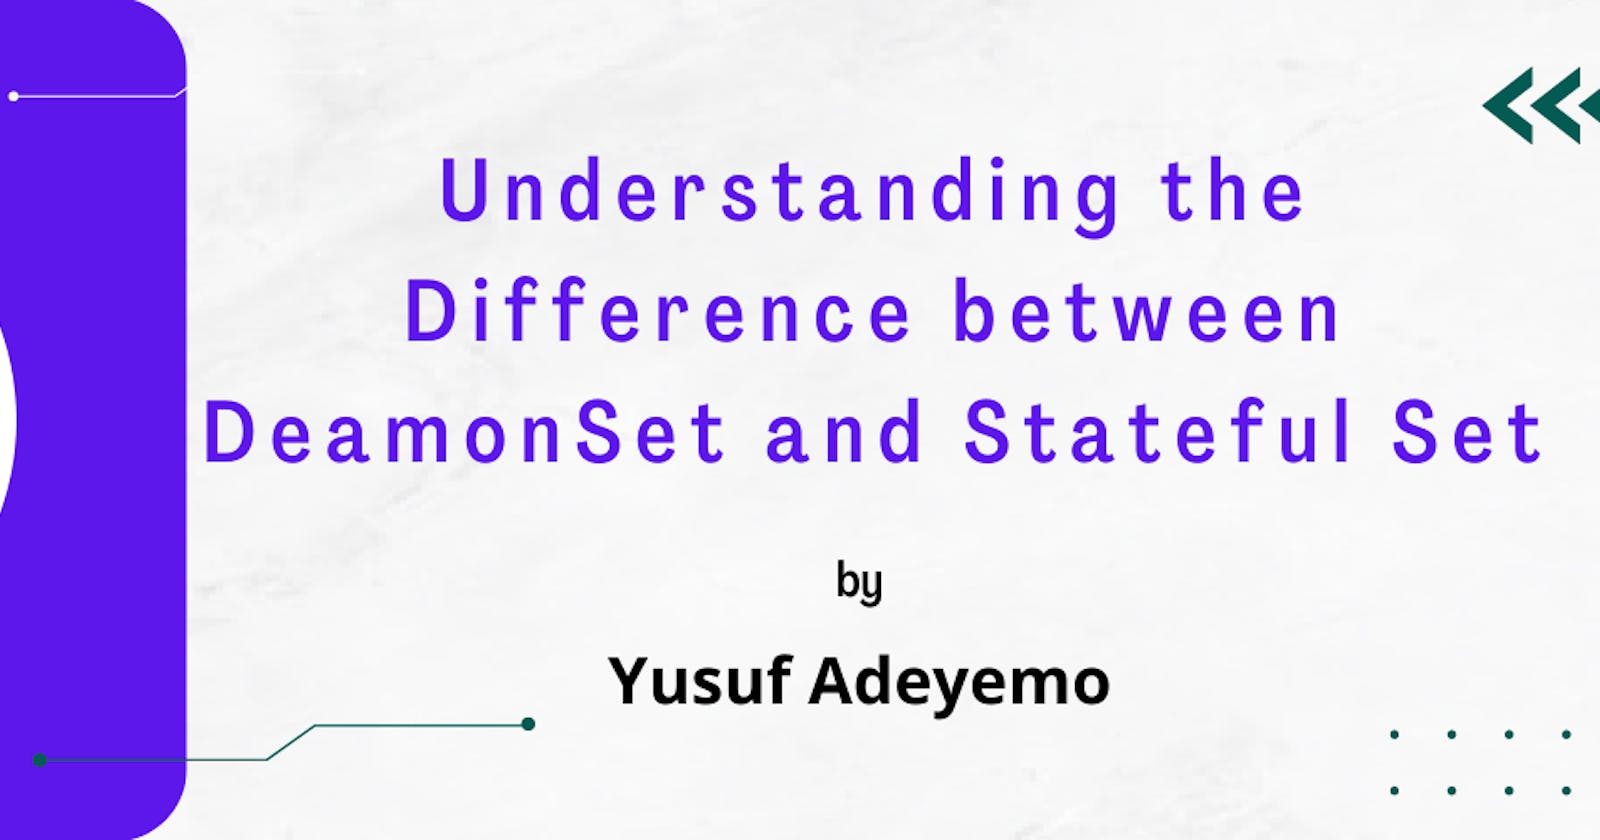 Difference between Kubernetes DeamonSet and Stateful Set